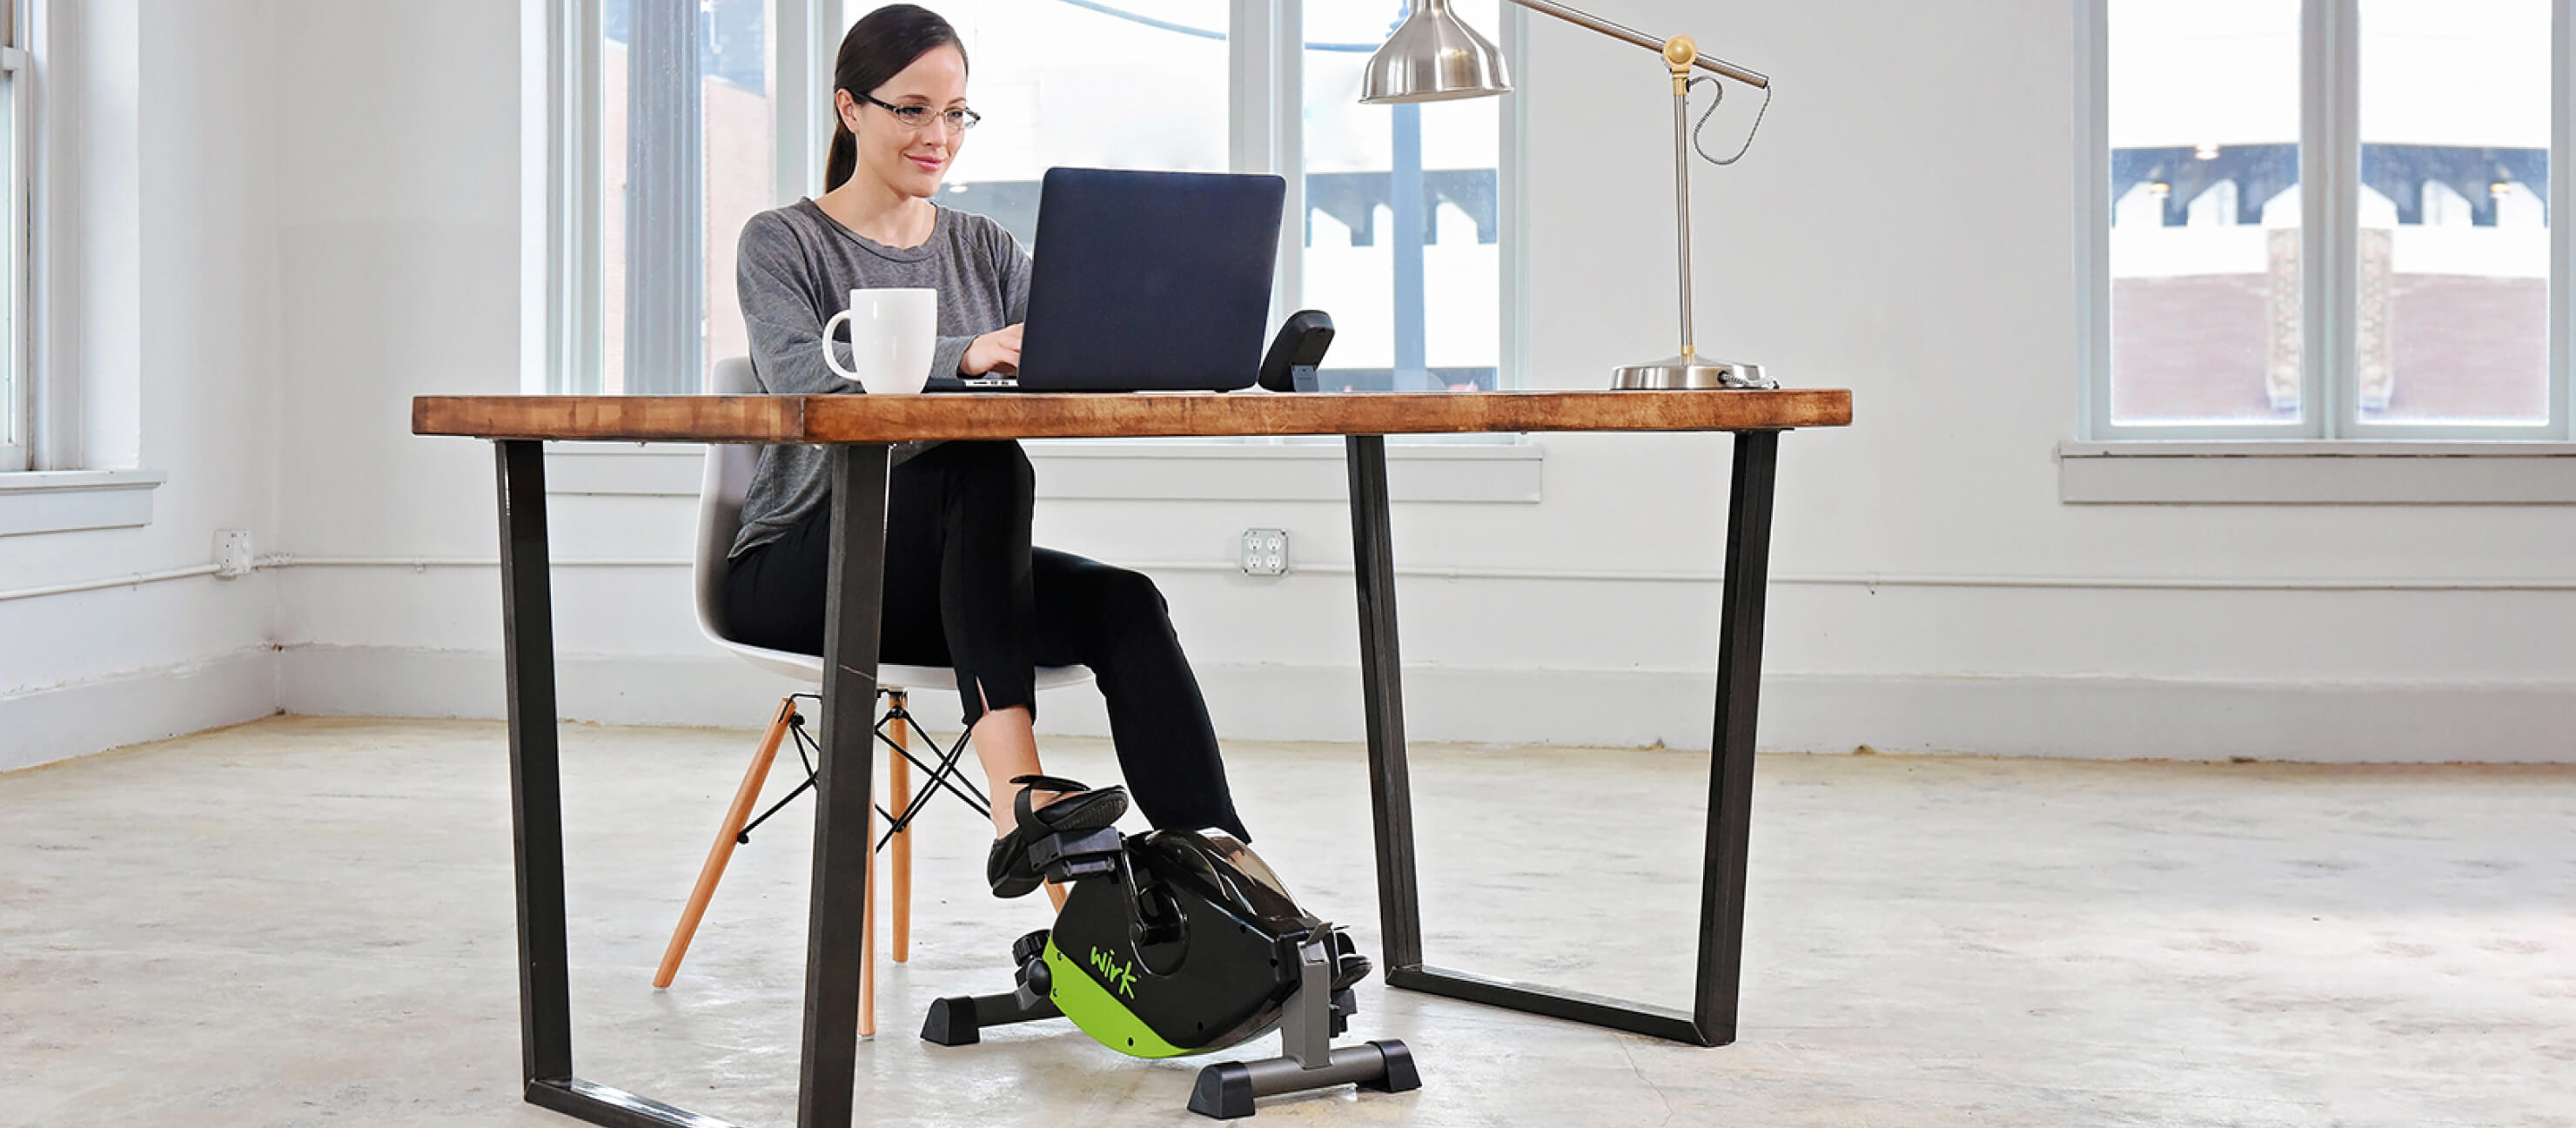 A woman works at her desk while pedaling on her mini exercise bike